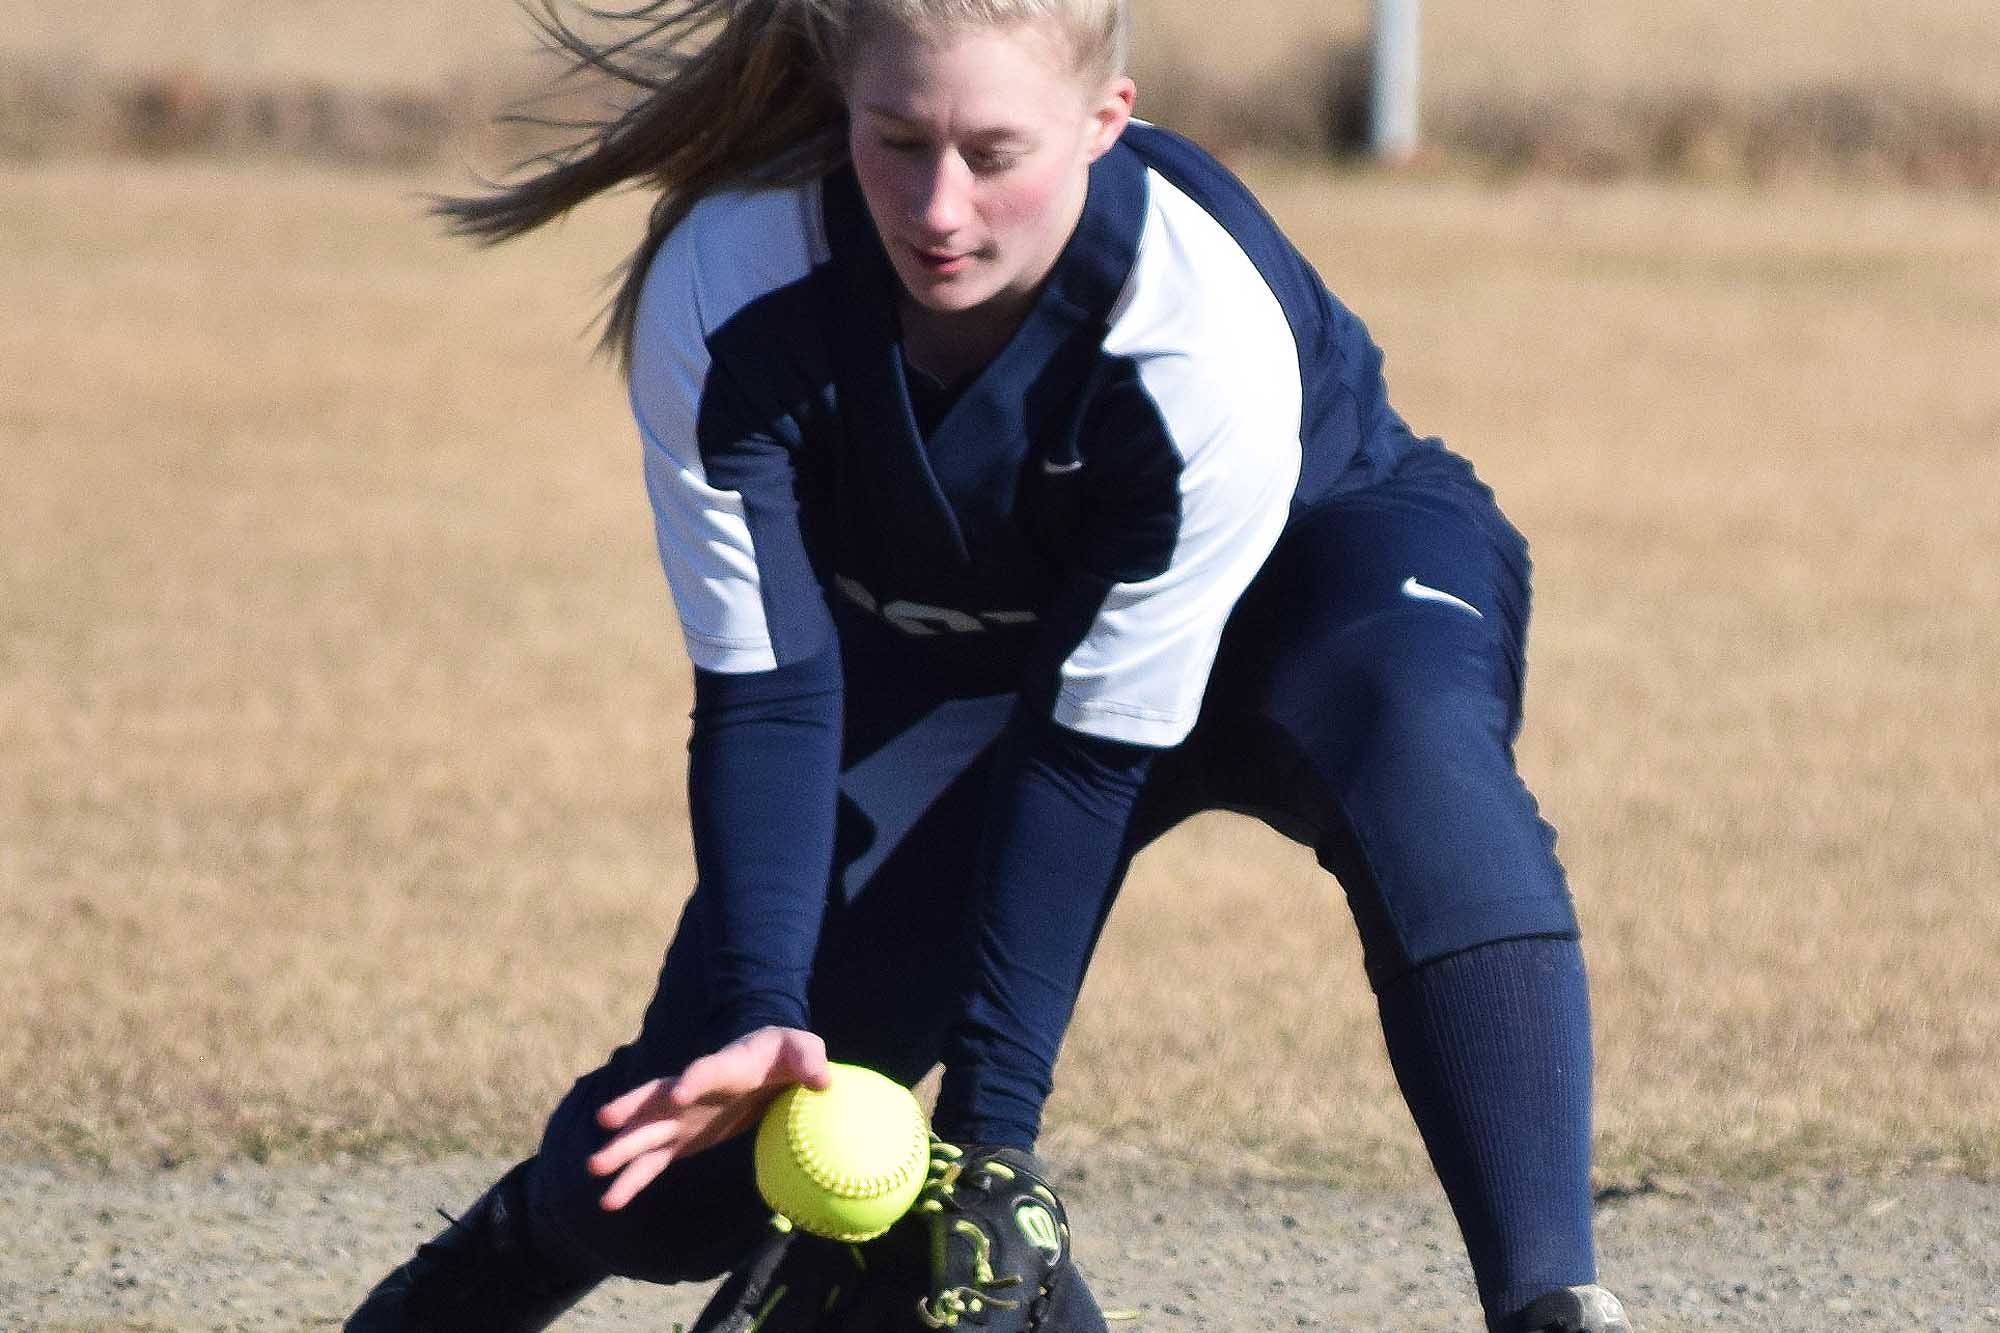 Softball season preview: How to beat the Southeast teams